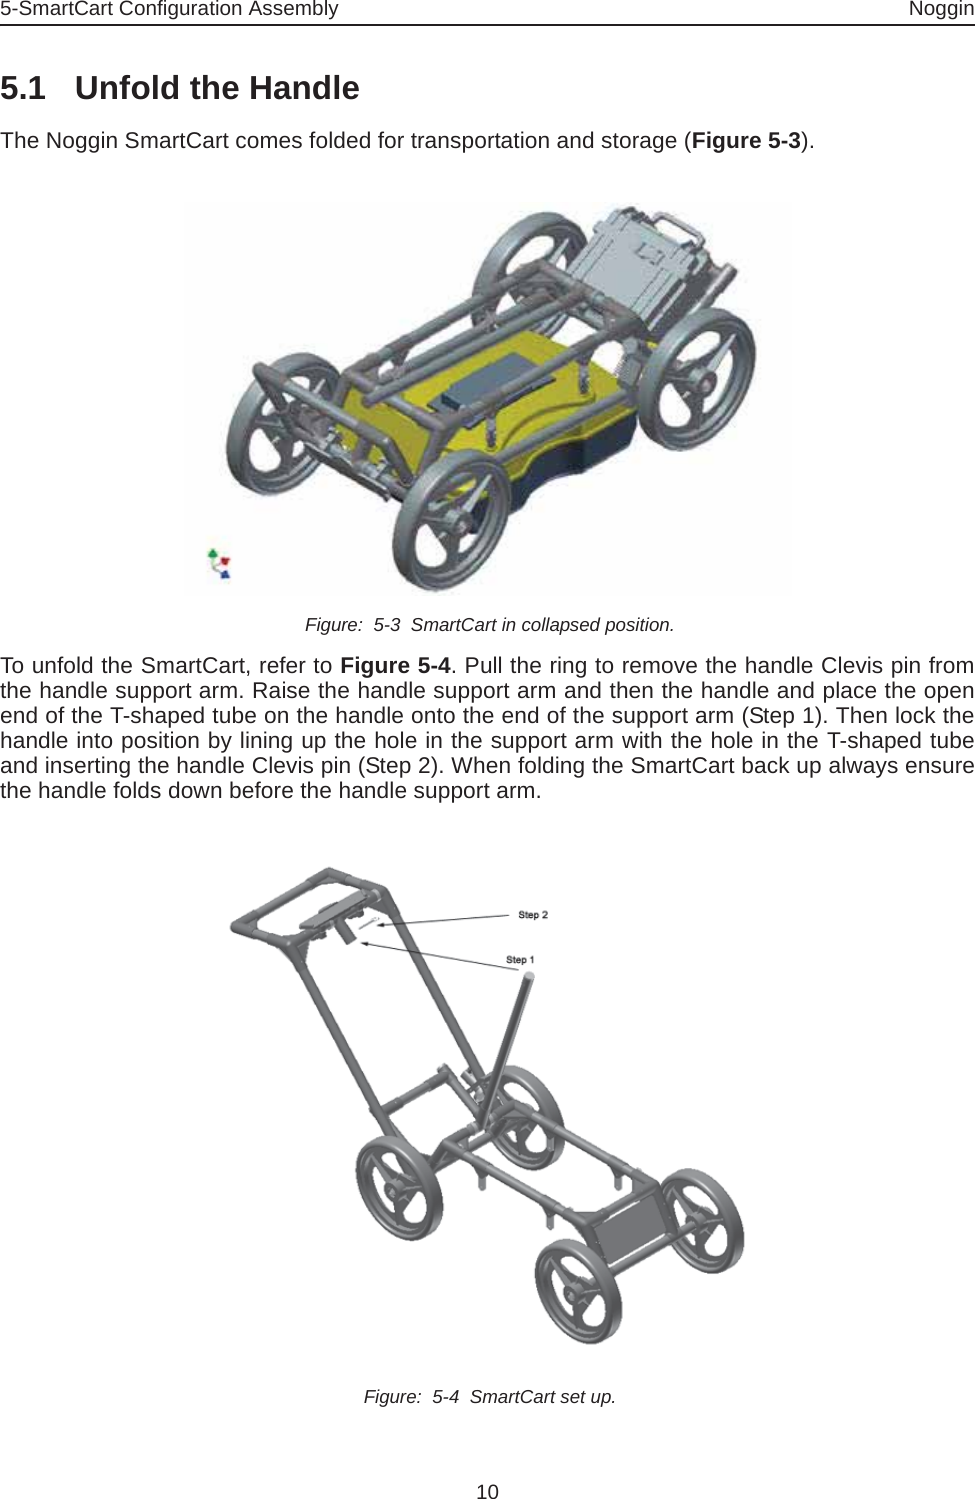 5-SmartCart Configuration Assembly Noggin105.1 Unfold the Handle The Noggin SmartCart comes folded for transportation and storage (Figure 5-3).  Figure:  5-3  SmartCart in collapsed position.To unfold the SmartCart, refer to Figure 5-4. Pull the ring to remove the handle Clevis pin fromthe handle support arm. Raise the handle support arm and then the handle and place the openend of the T-shaped tube on the handle onto the end of the support arm (Step 1). Then lock thehandle into position by lining up the hole in the support arm with the hole in the T-shaped tubeand inserting the handle Clevis pin (Step 2). When folding the SmartCart back up always ensurethe handle folds down before the handle support arm. Figure:  5-4  SmartCart set up.